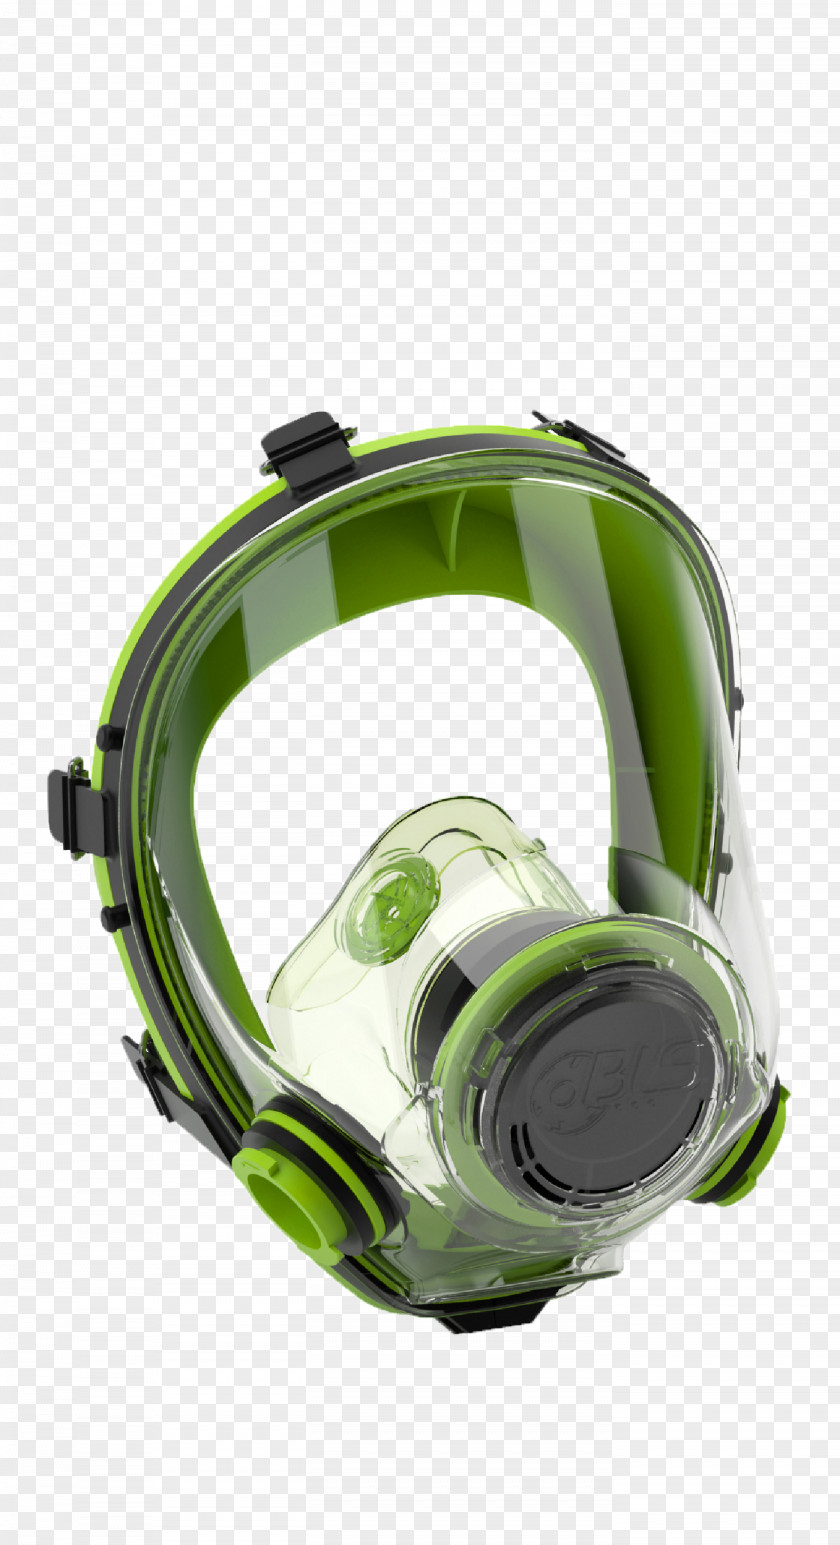 Oxygen Mask Gas Personal Protective Equipment Clothing Respirator PNG